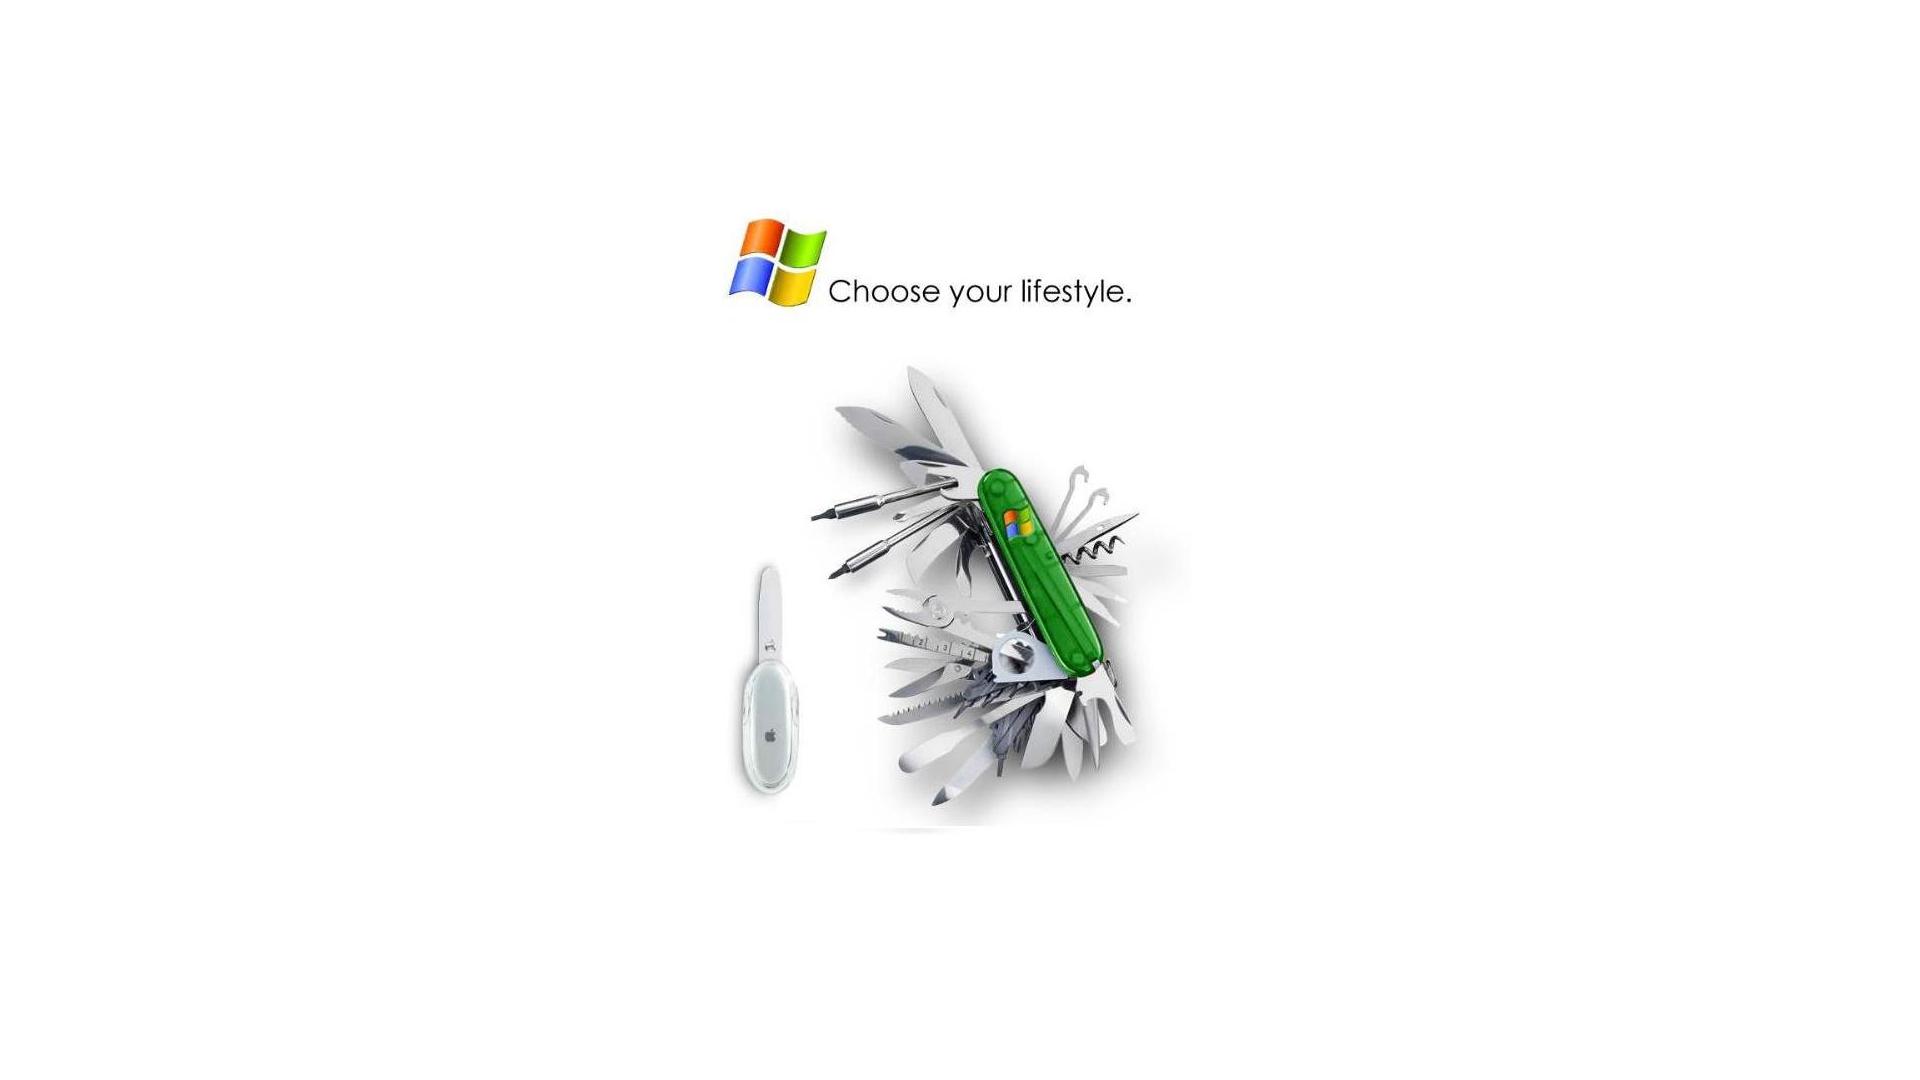 Apple Inc., funny, operating systems, operating system wars, white background, truth, windows - desktop wallpaper